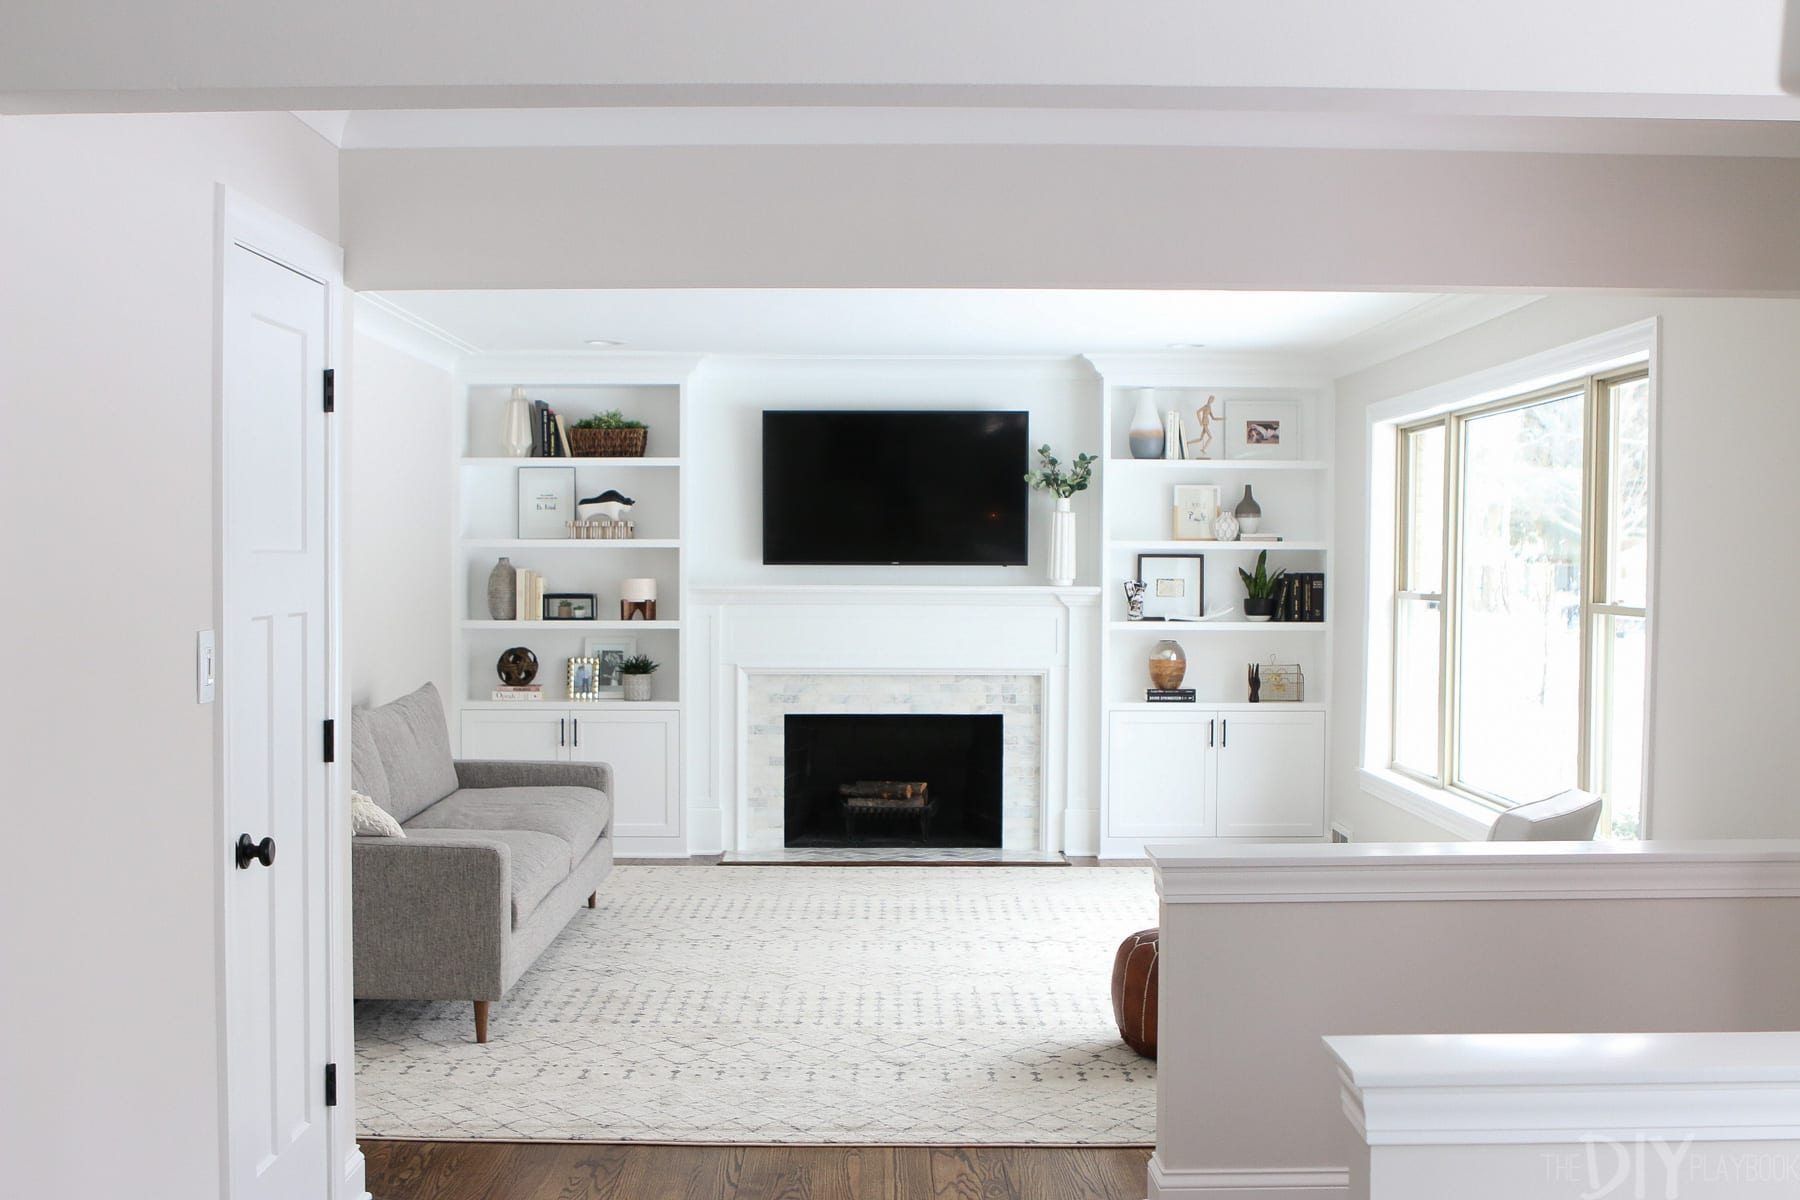 White Built Ins Around The Fireplace, How To Build Cabinets Around Fireplace